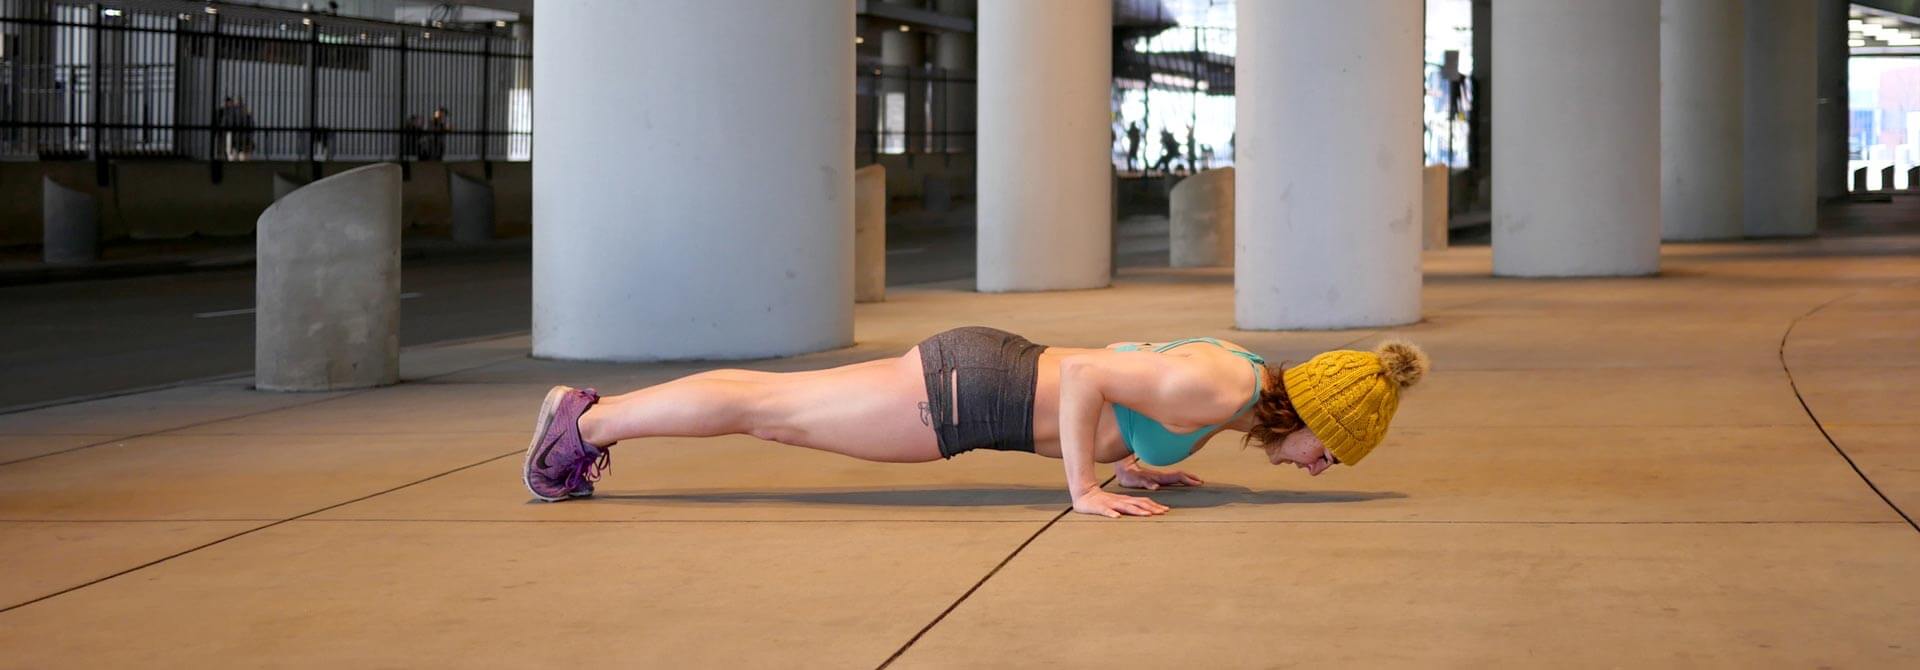 GymnasticBodies athlete demonstrates a hold at the bottom of a push-up for more strength gains. 